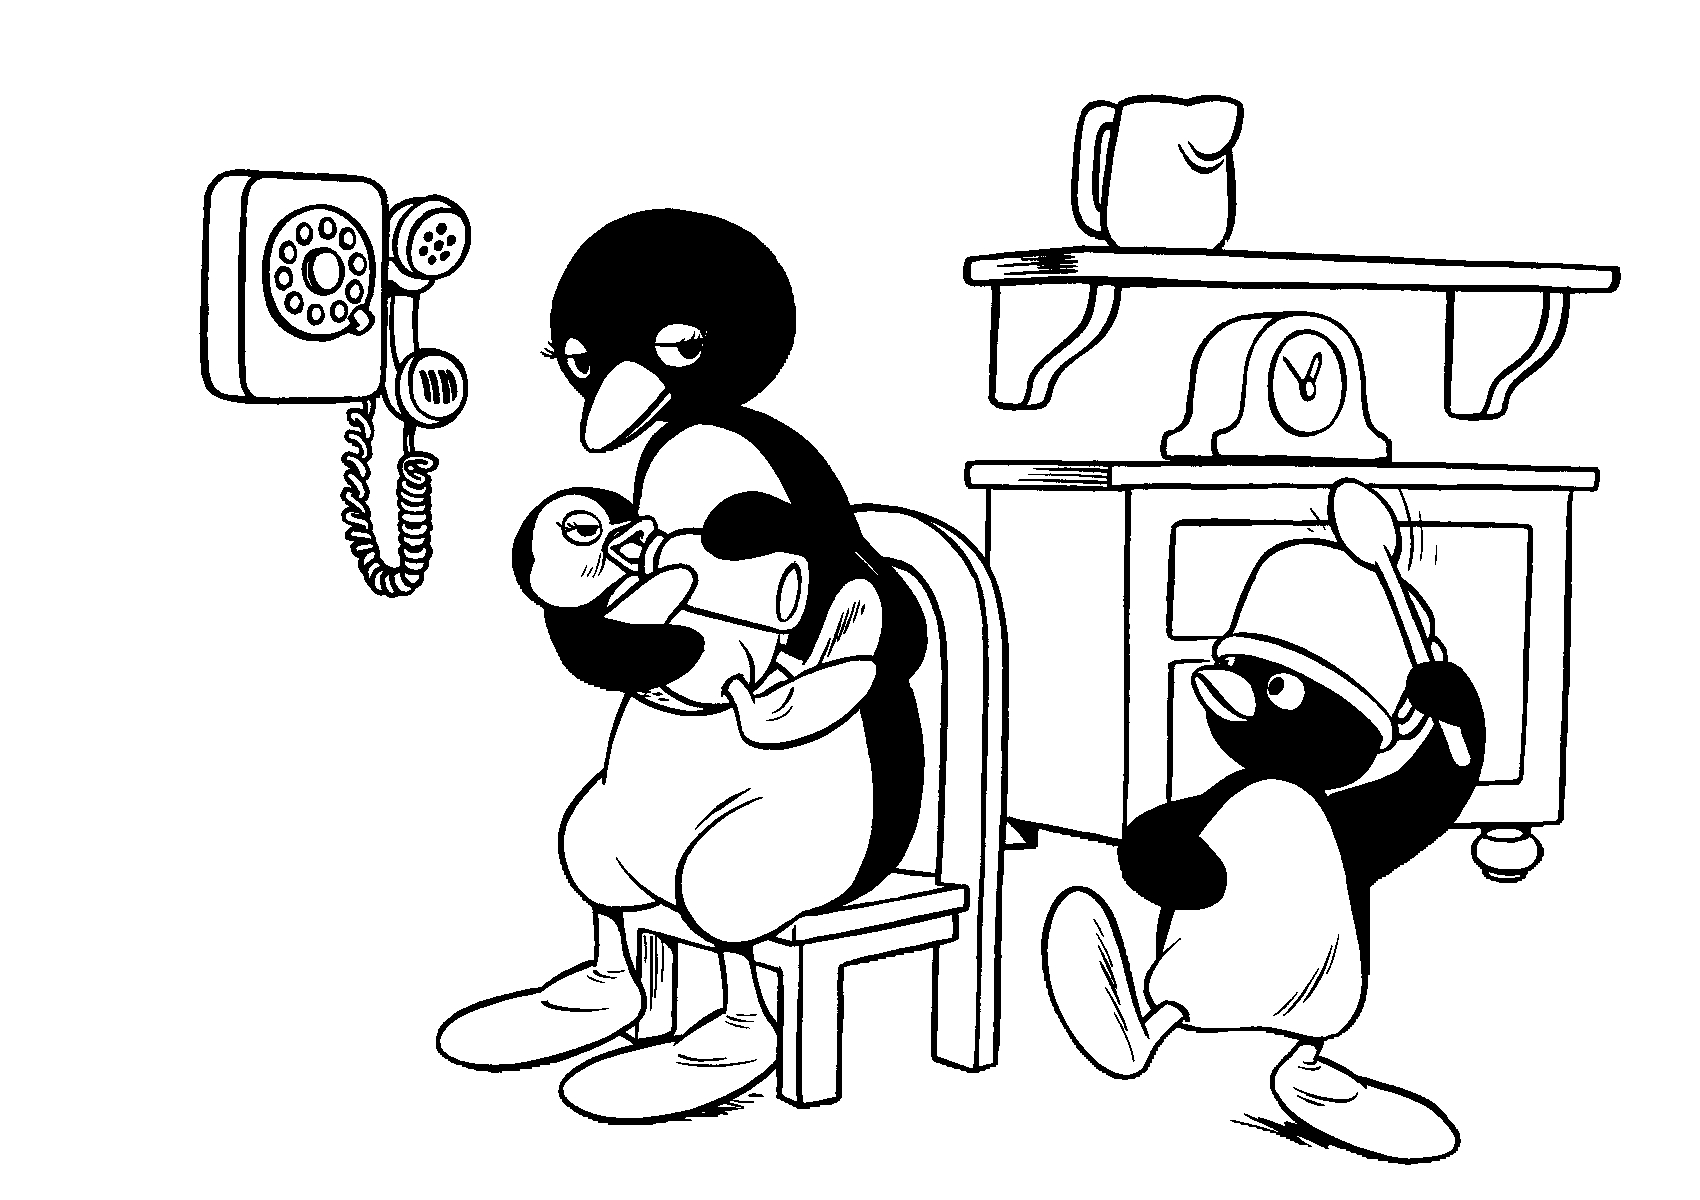 Drawing 7 from Pingu coloring page to print and coloring